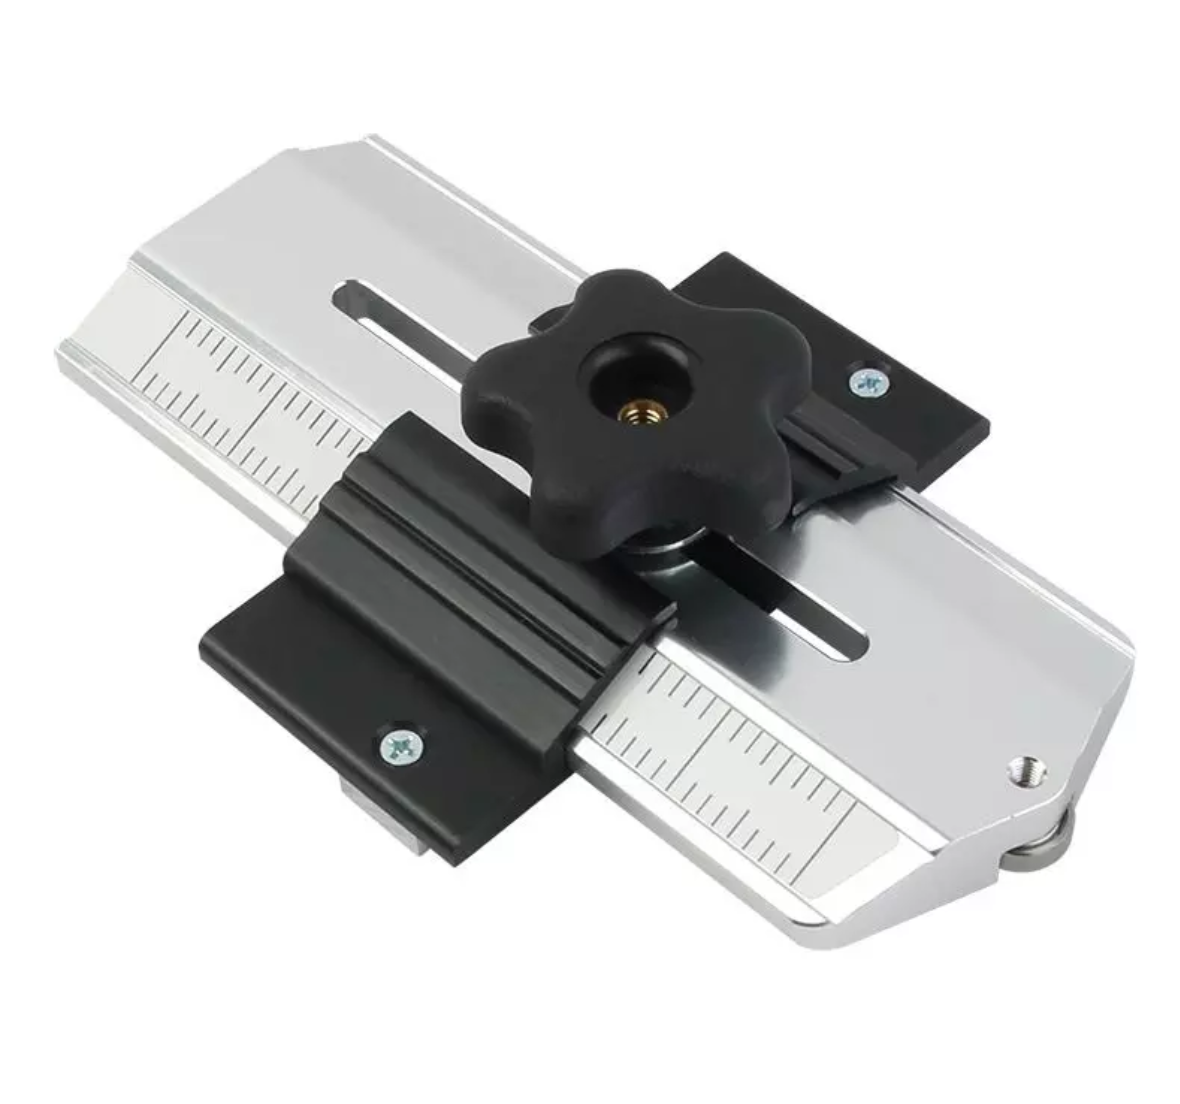 Levoite™ Universal Fence Clamps Adjustable G Clamp for Woodworking